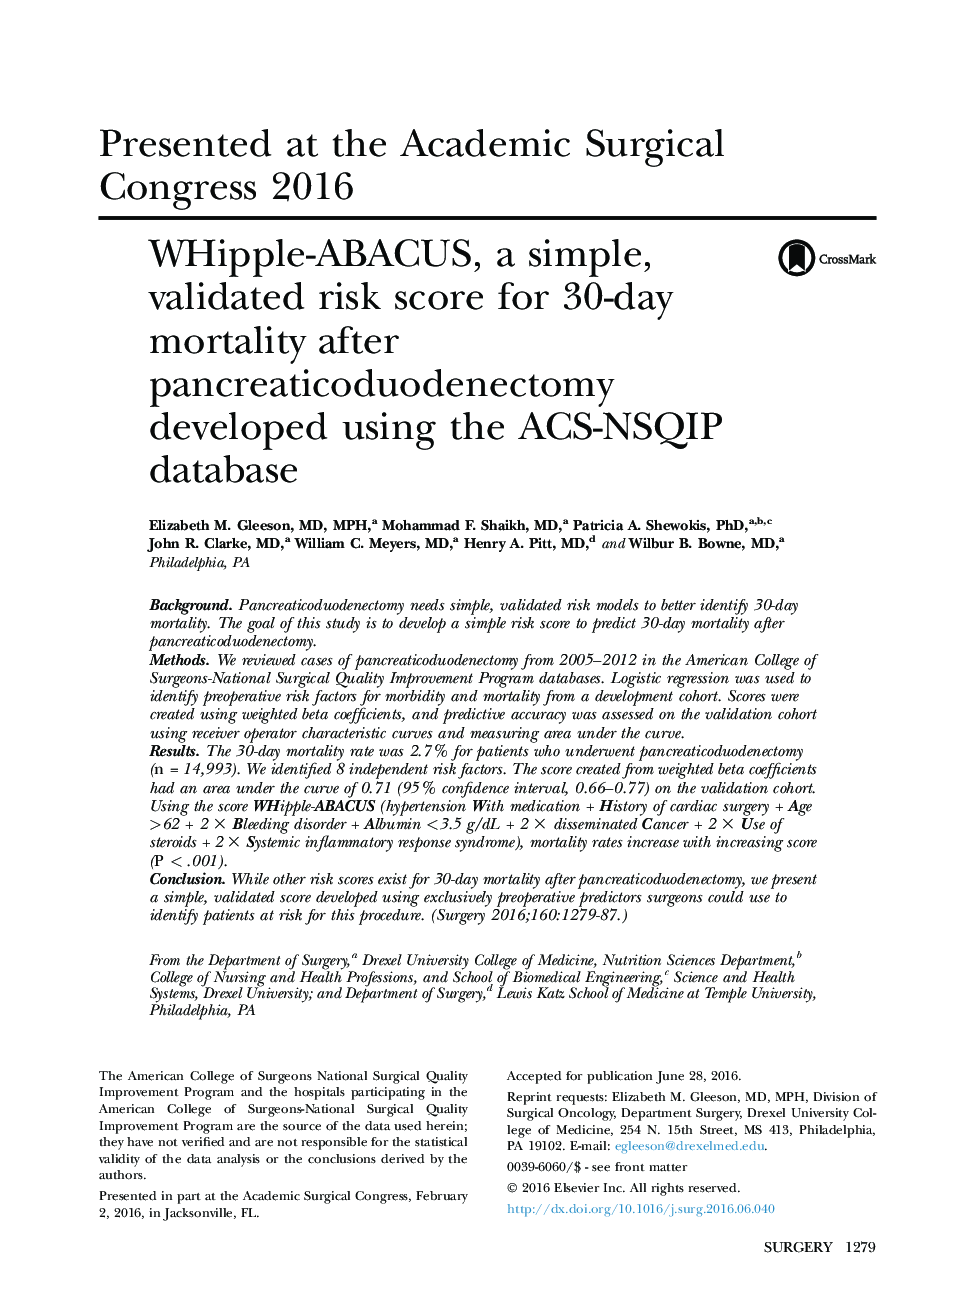 WHipple-ABACUS, a simple, validated risk score for 30-day mortality after pancreaticoduodenectomy developed using the ACS-NSQIP database